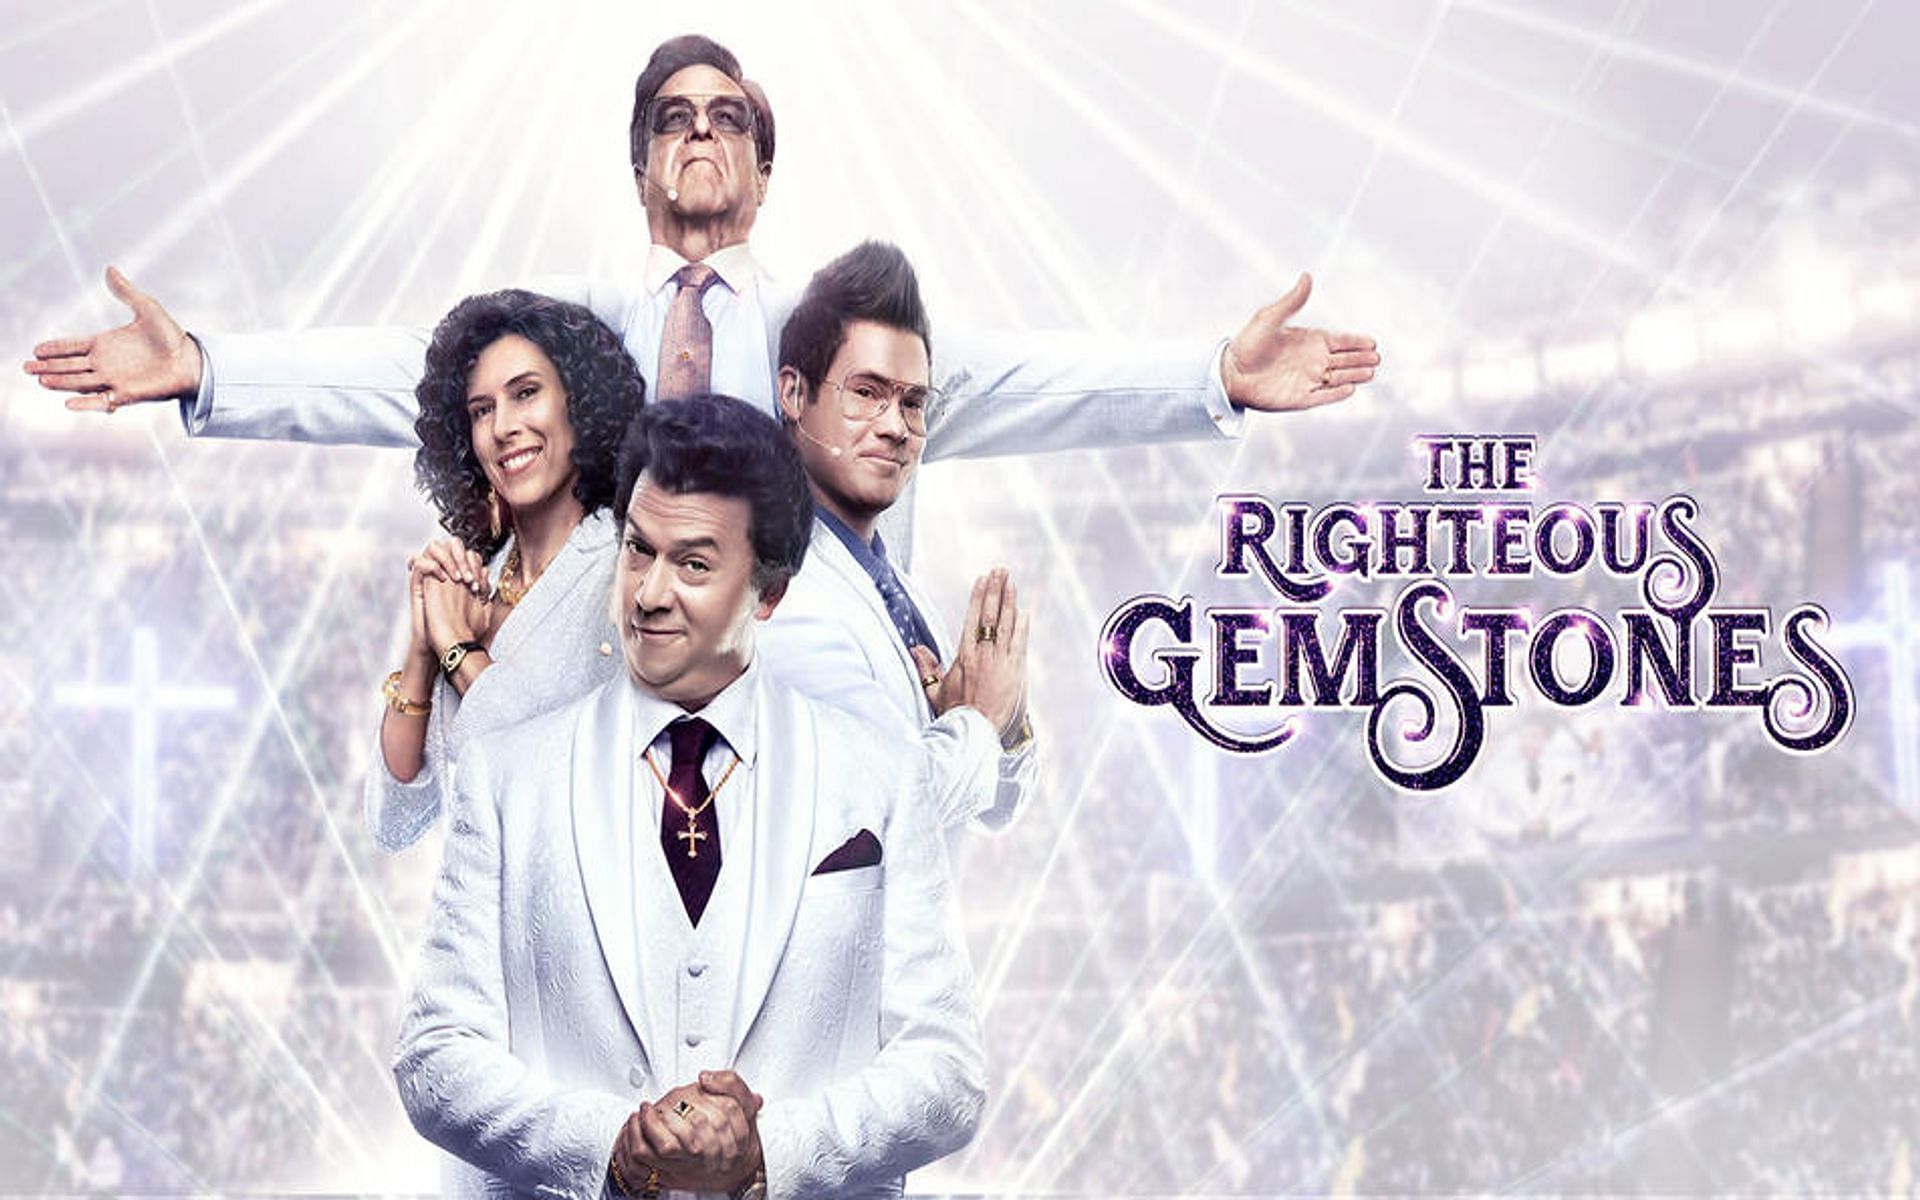 Why does righteous gemstones show so many dicks